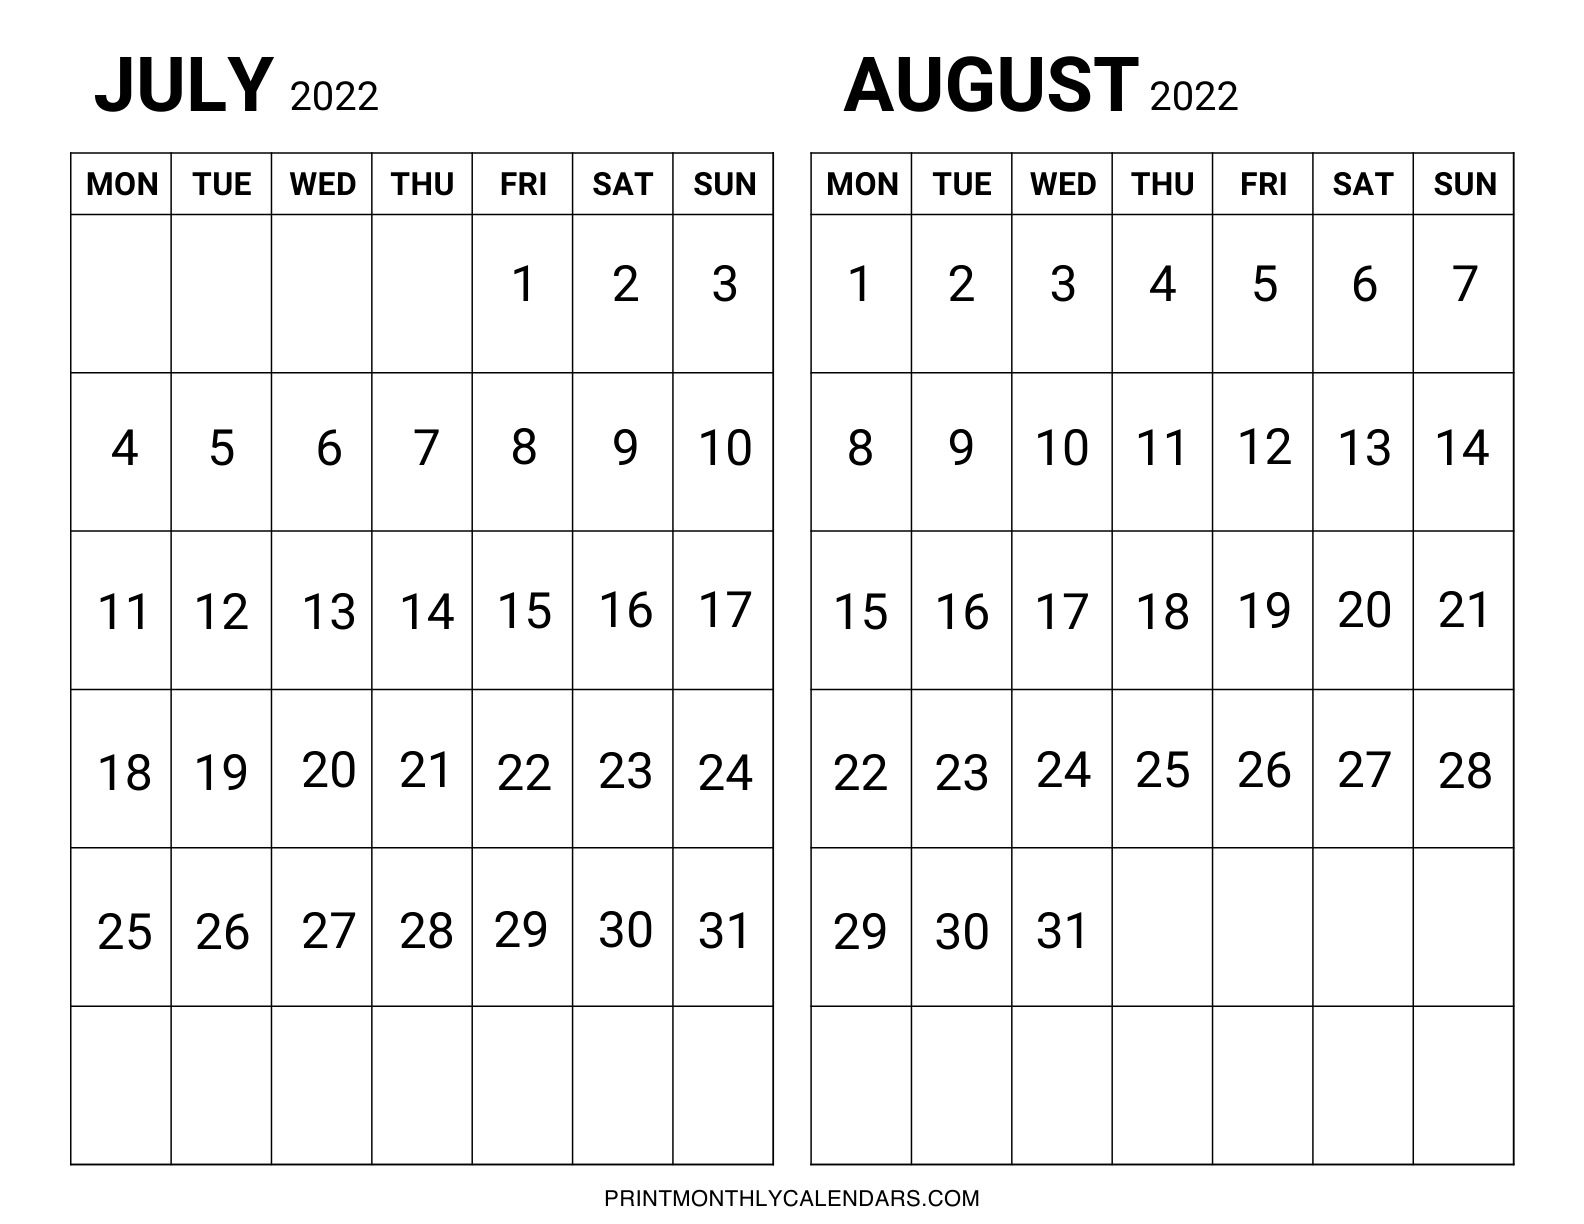 Horizontal calendar template for July and August 2022. The weekdays in the template begin on Monday, and bold monthly dates are written in the grid.